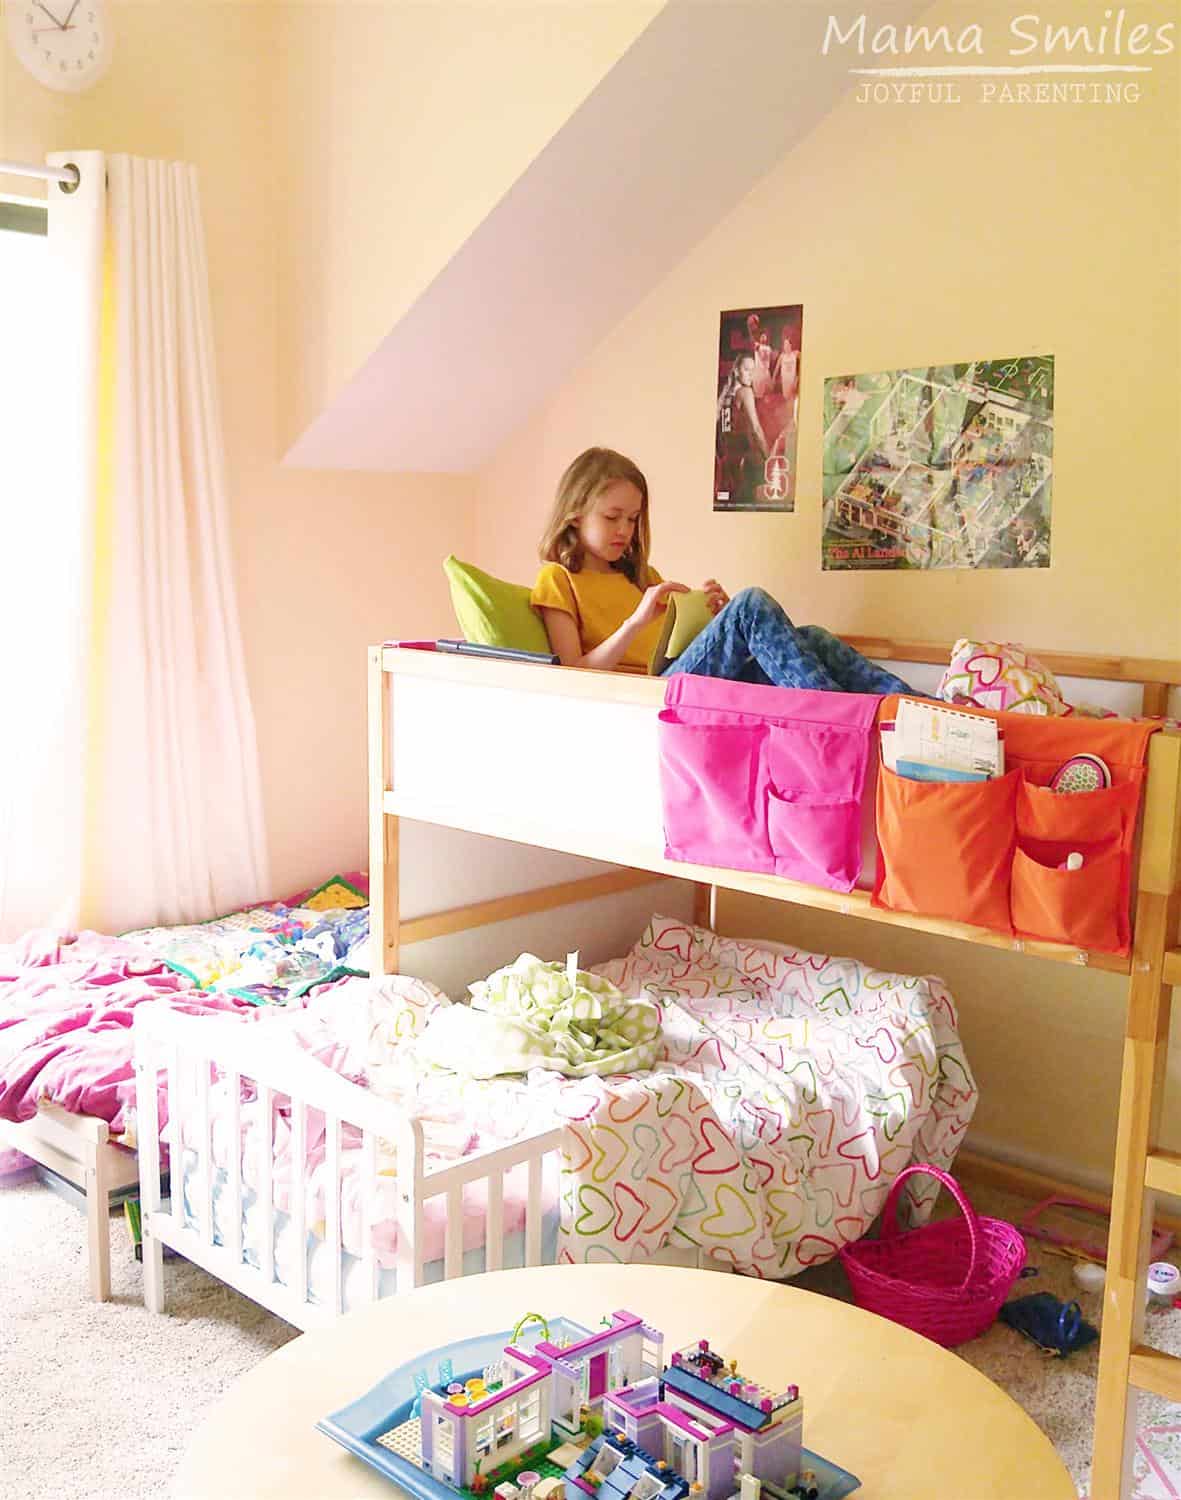 Shared sibling room: creating a space for each child. Love how this family makes small space living work for them!